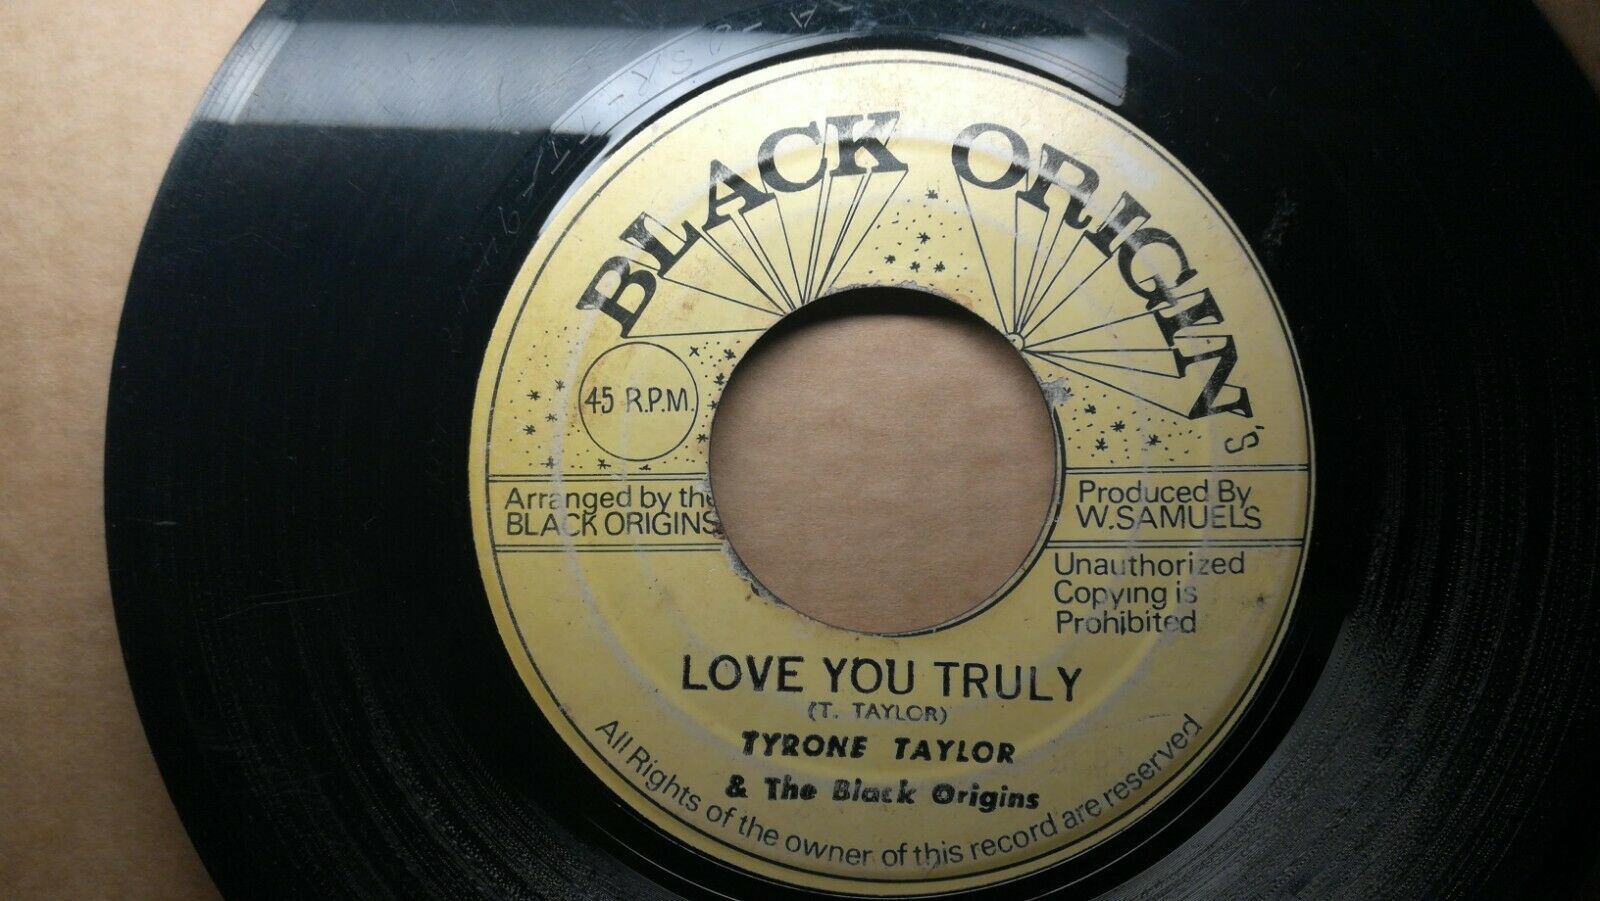  Tyrone Taylor, The Black Origins - Love You Truly